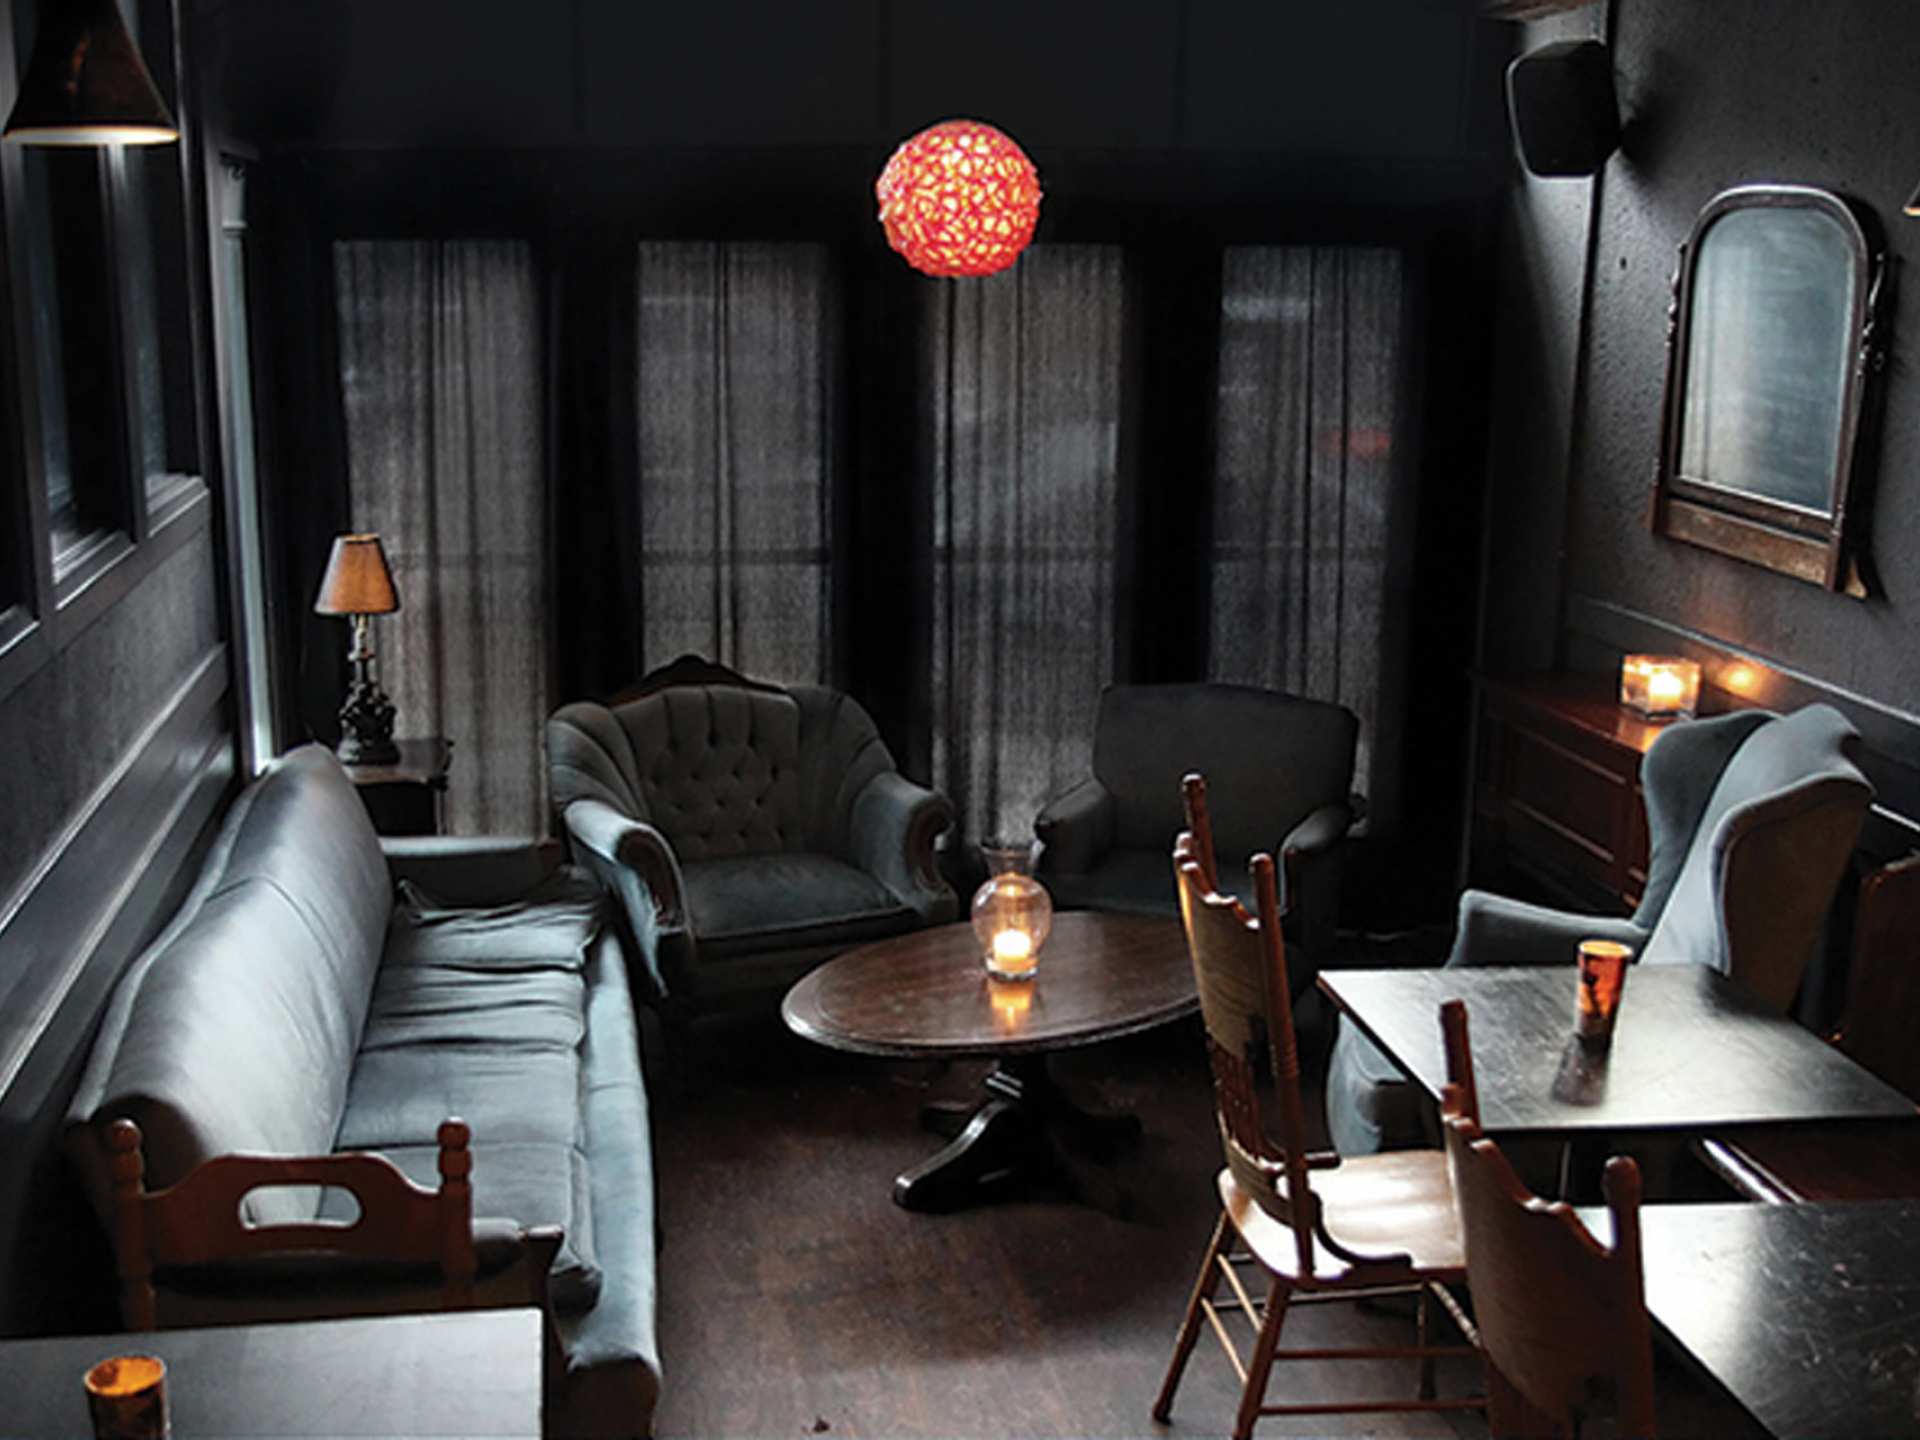 Restaurants and bars with live music in Toronto | Lounge seating inside The Emmet Ray